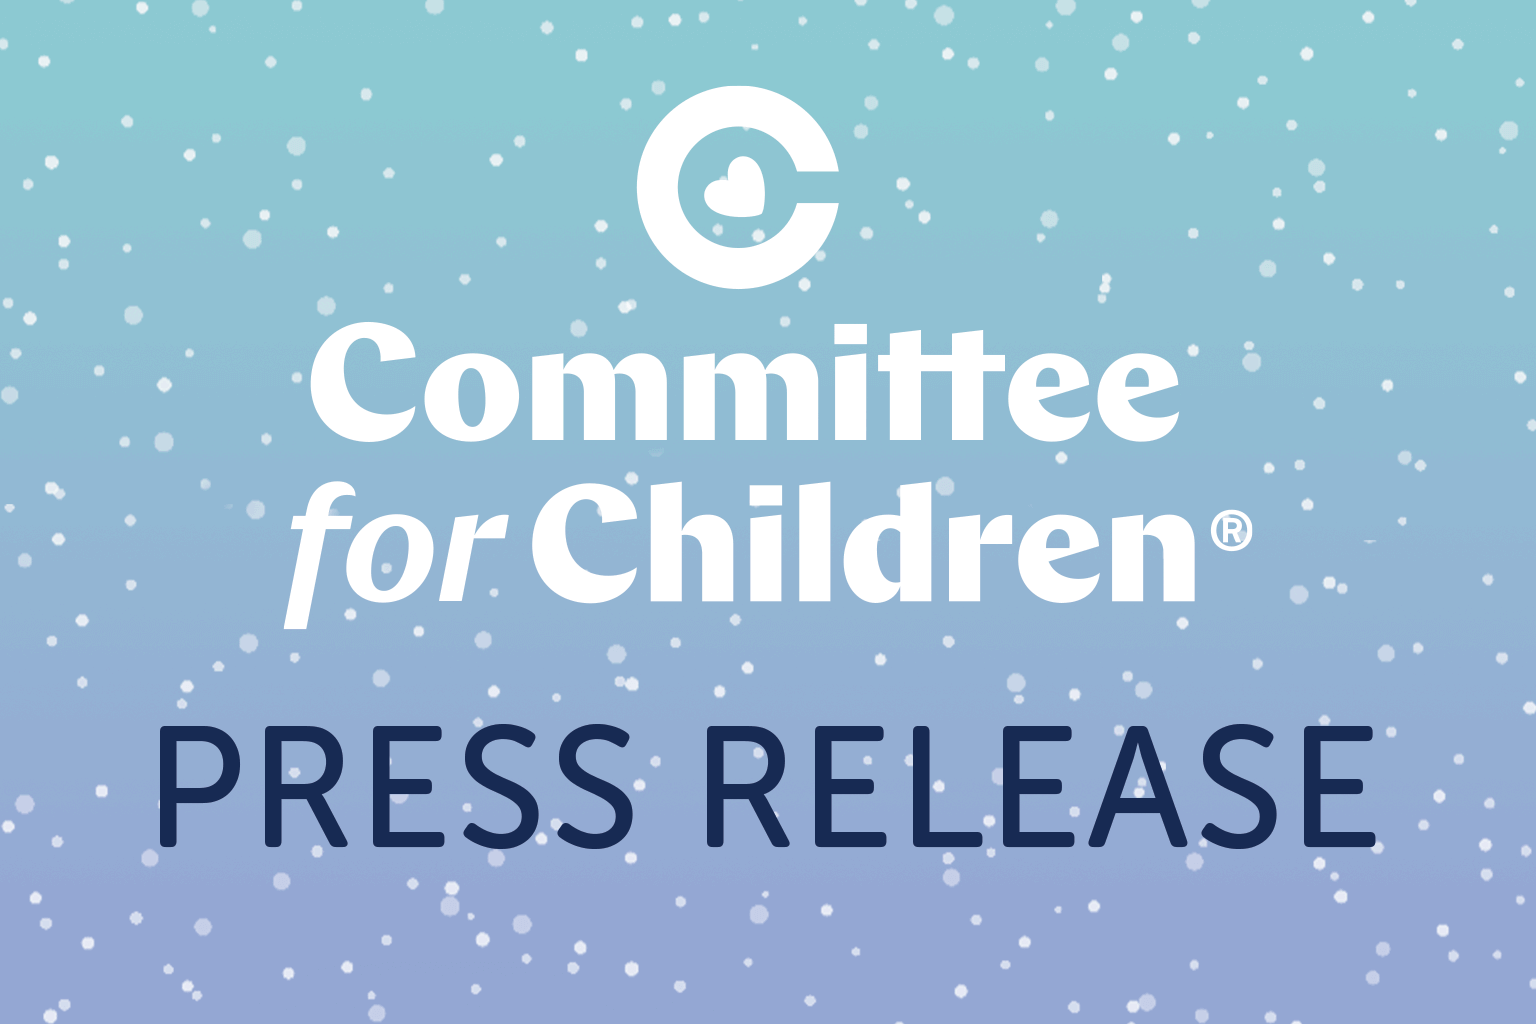 Committee for Children Press Release.